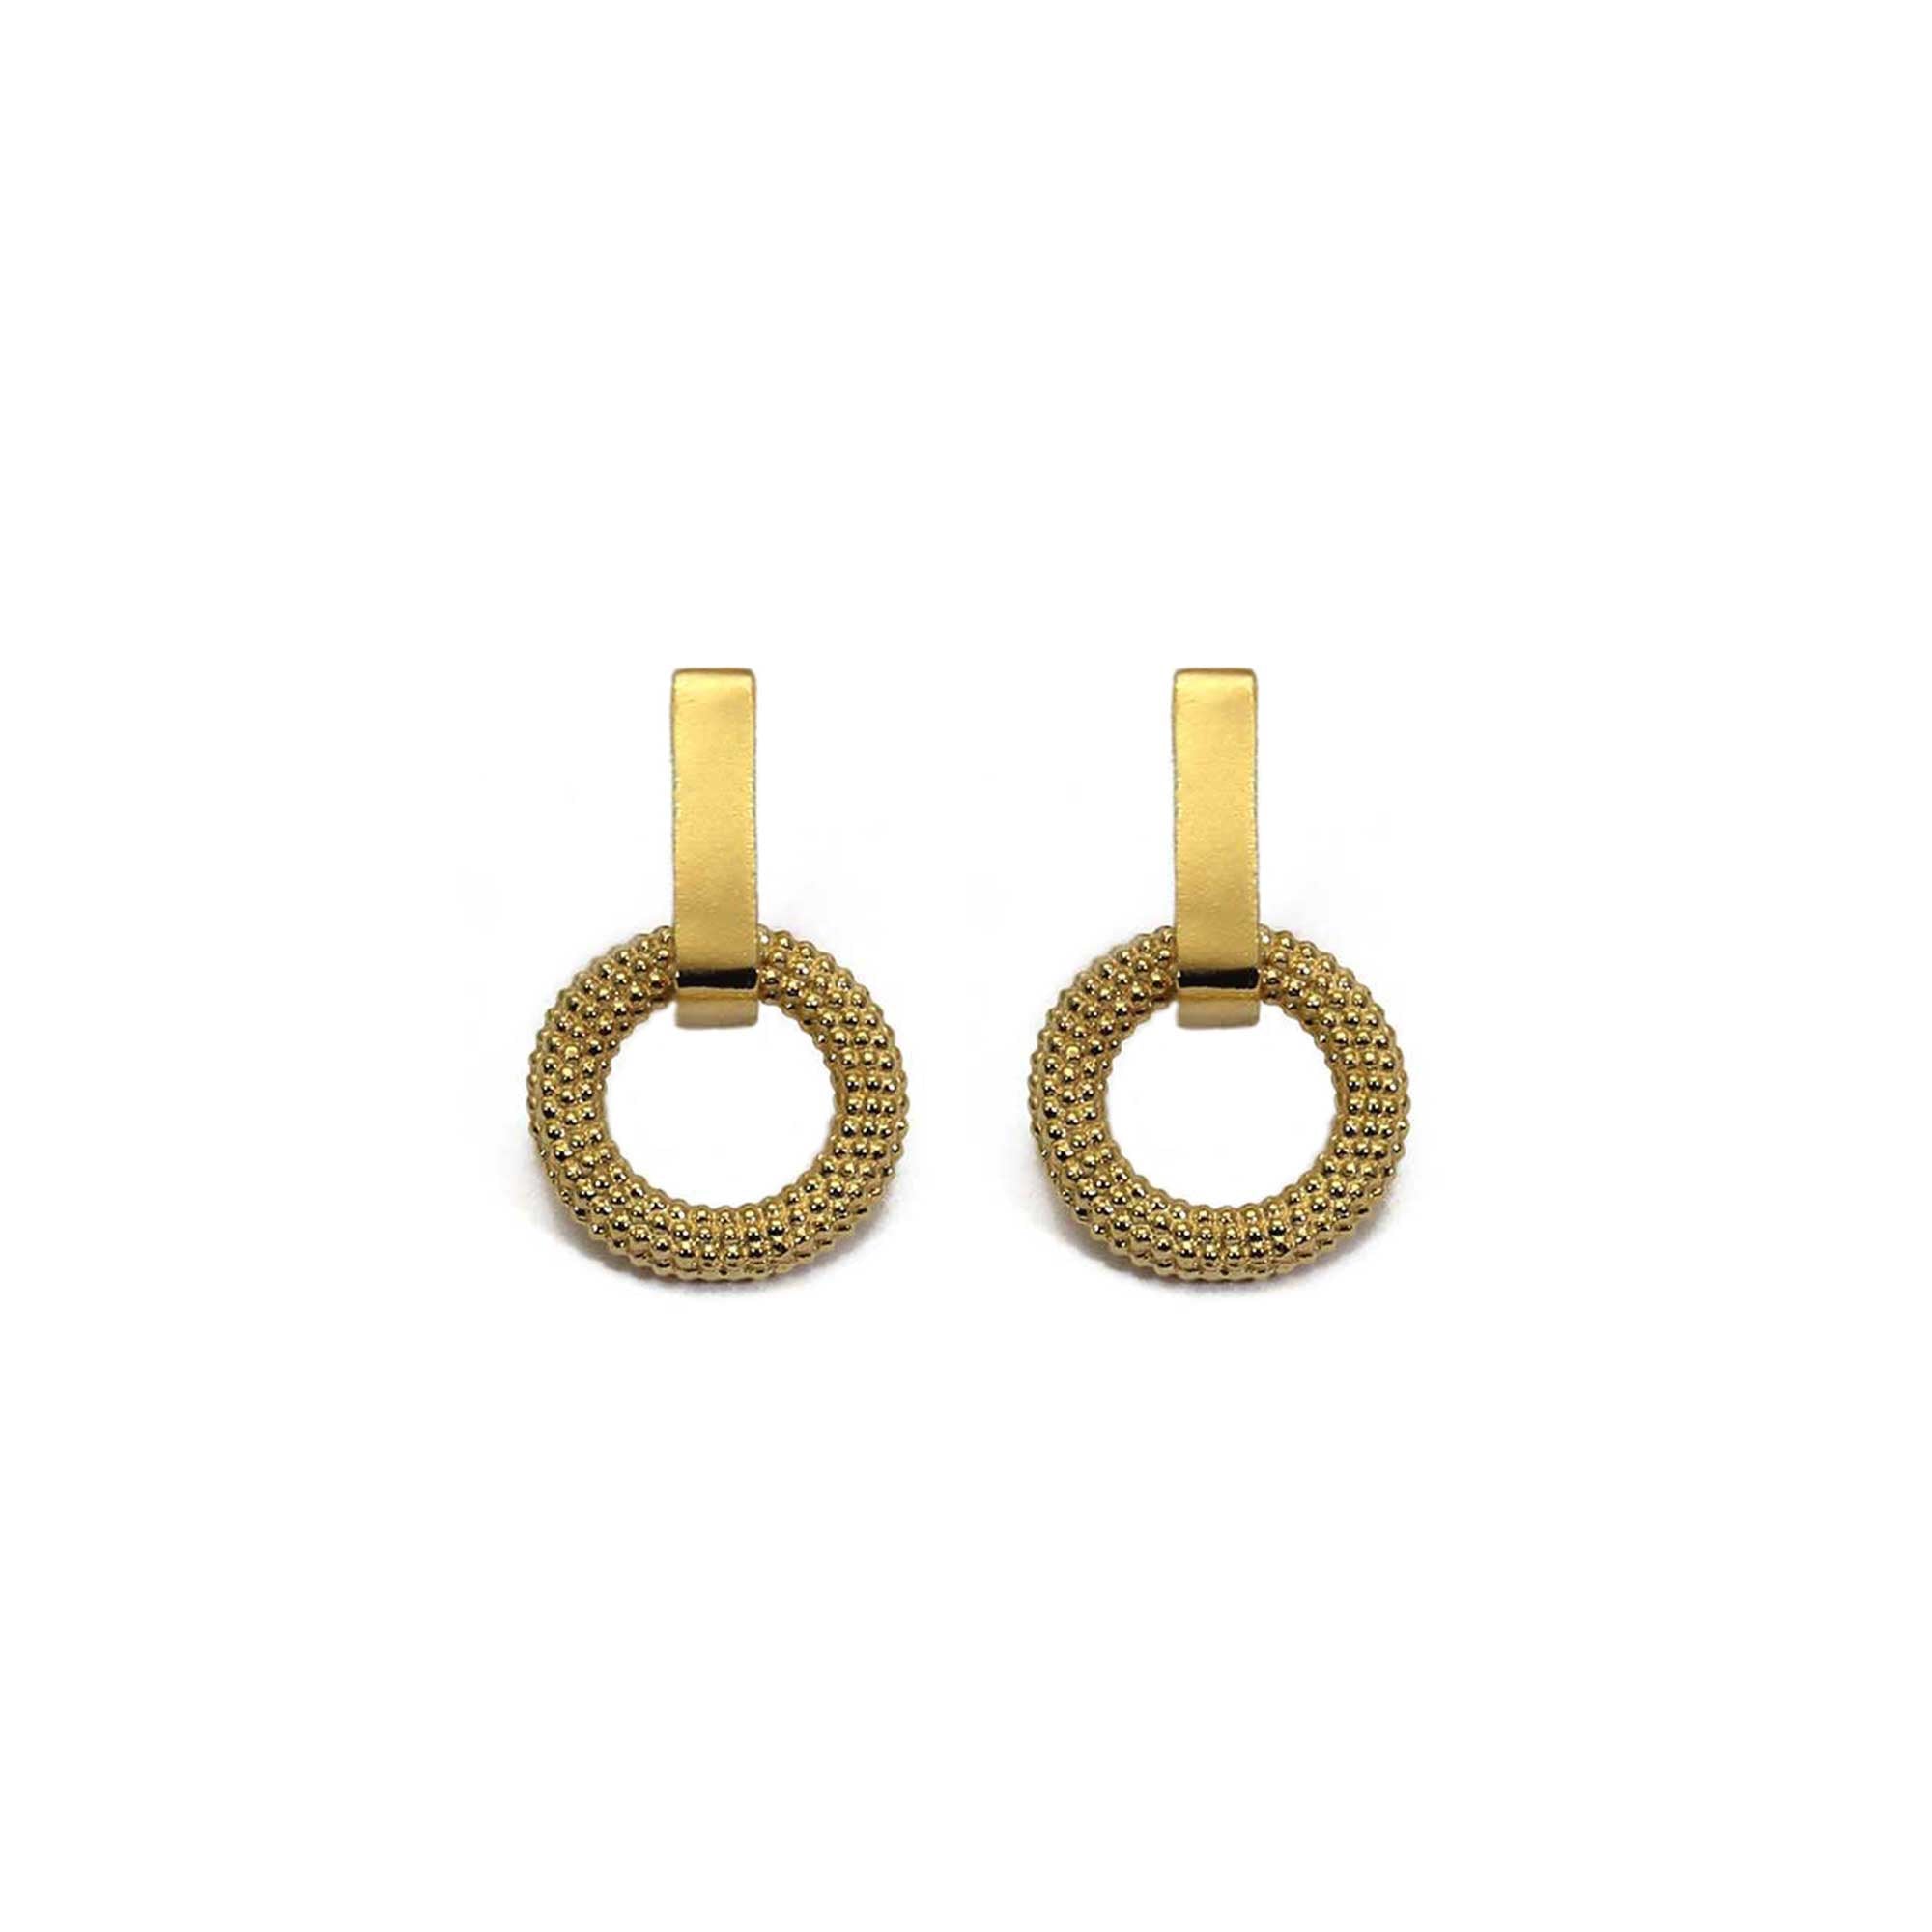 A pair of minimal yellow gold small drop earrings